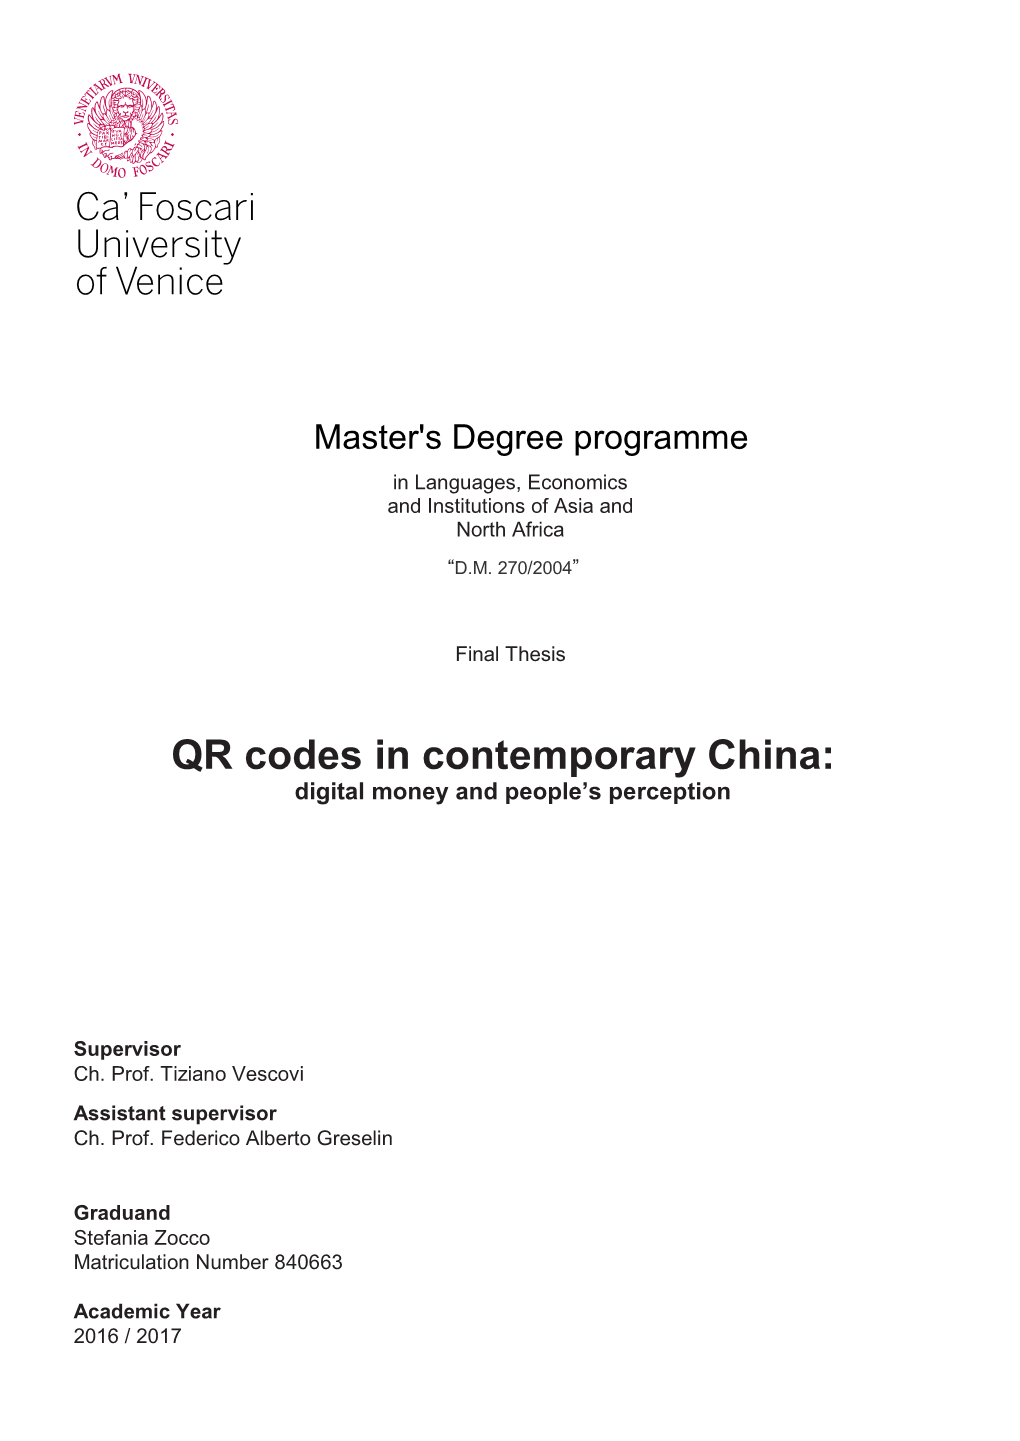 QR Codes in Contemporary China: Digital Money and People’S Perception